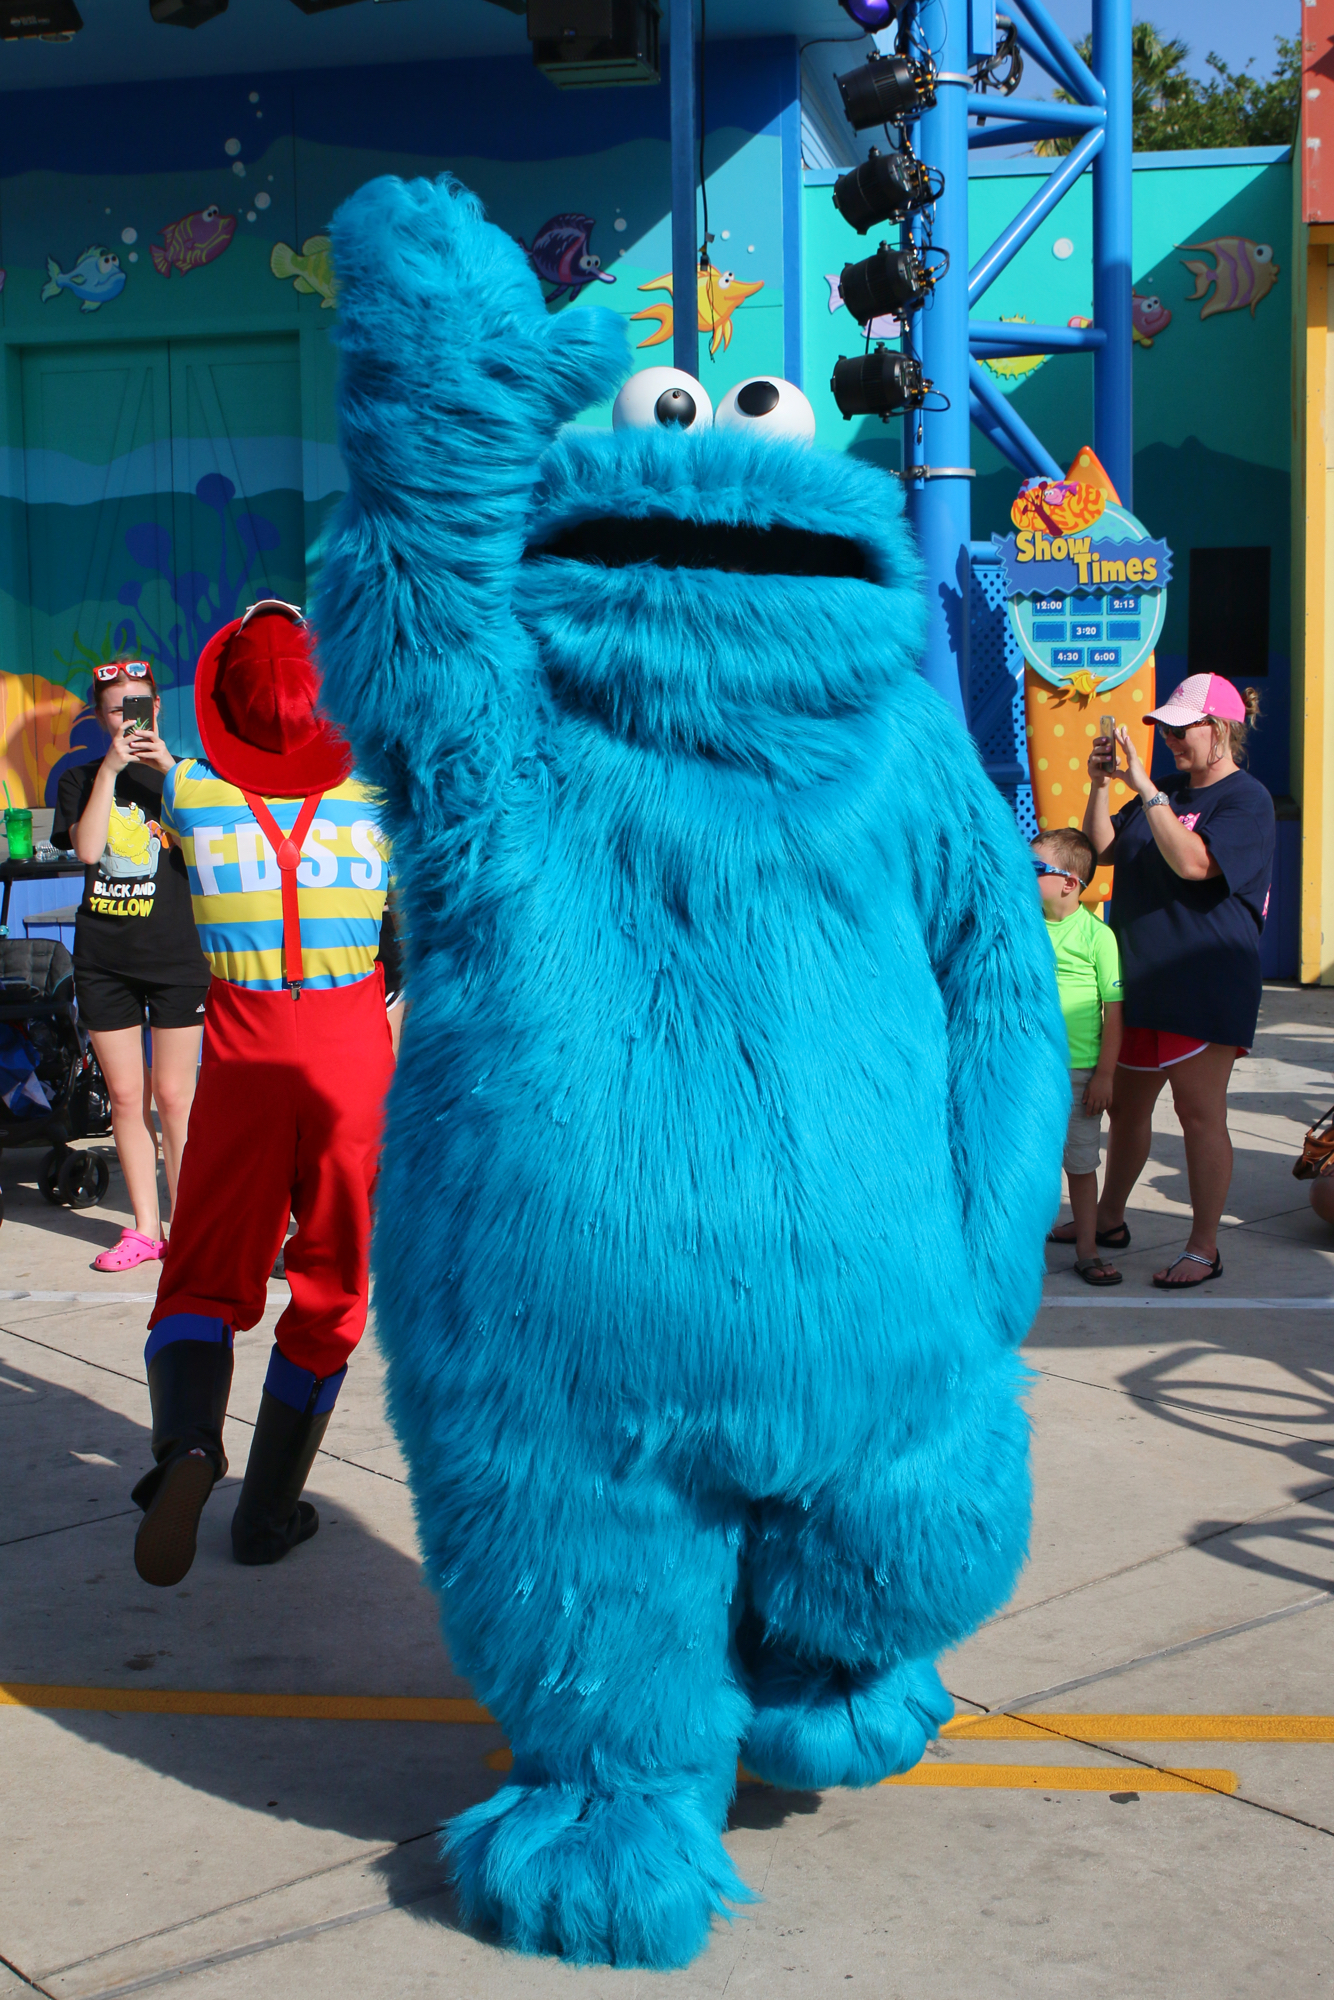 Cookie Monster dancing at Sesame Street Party Parade